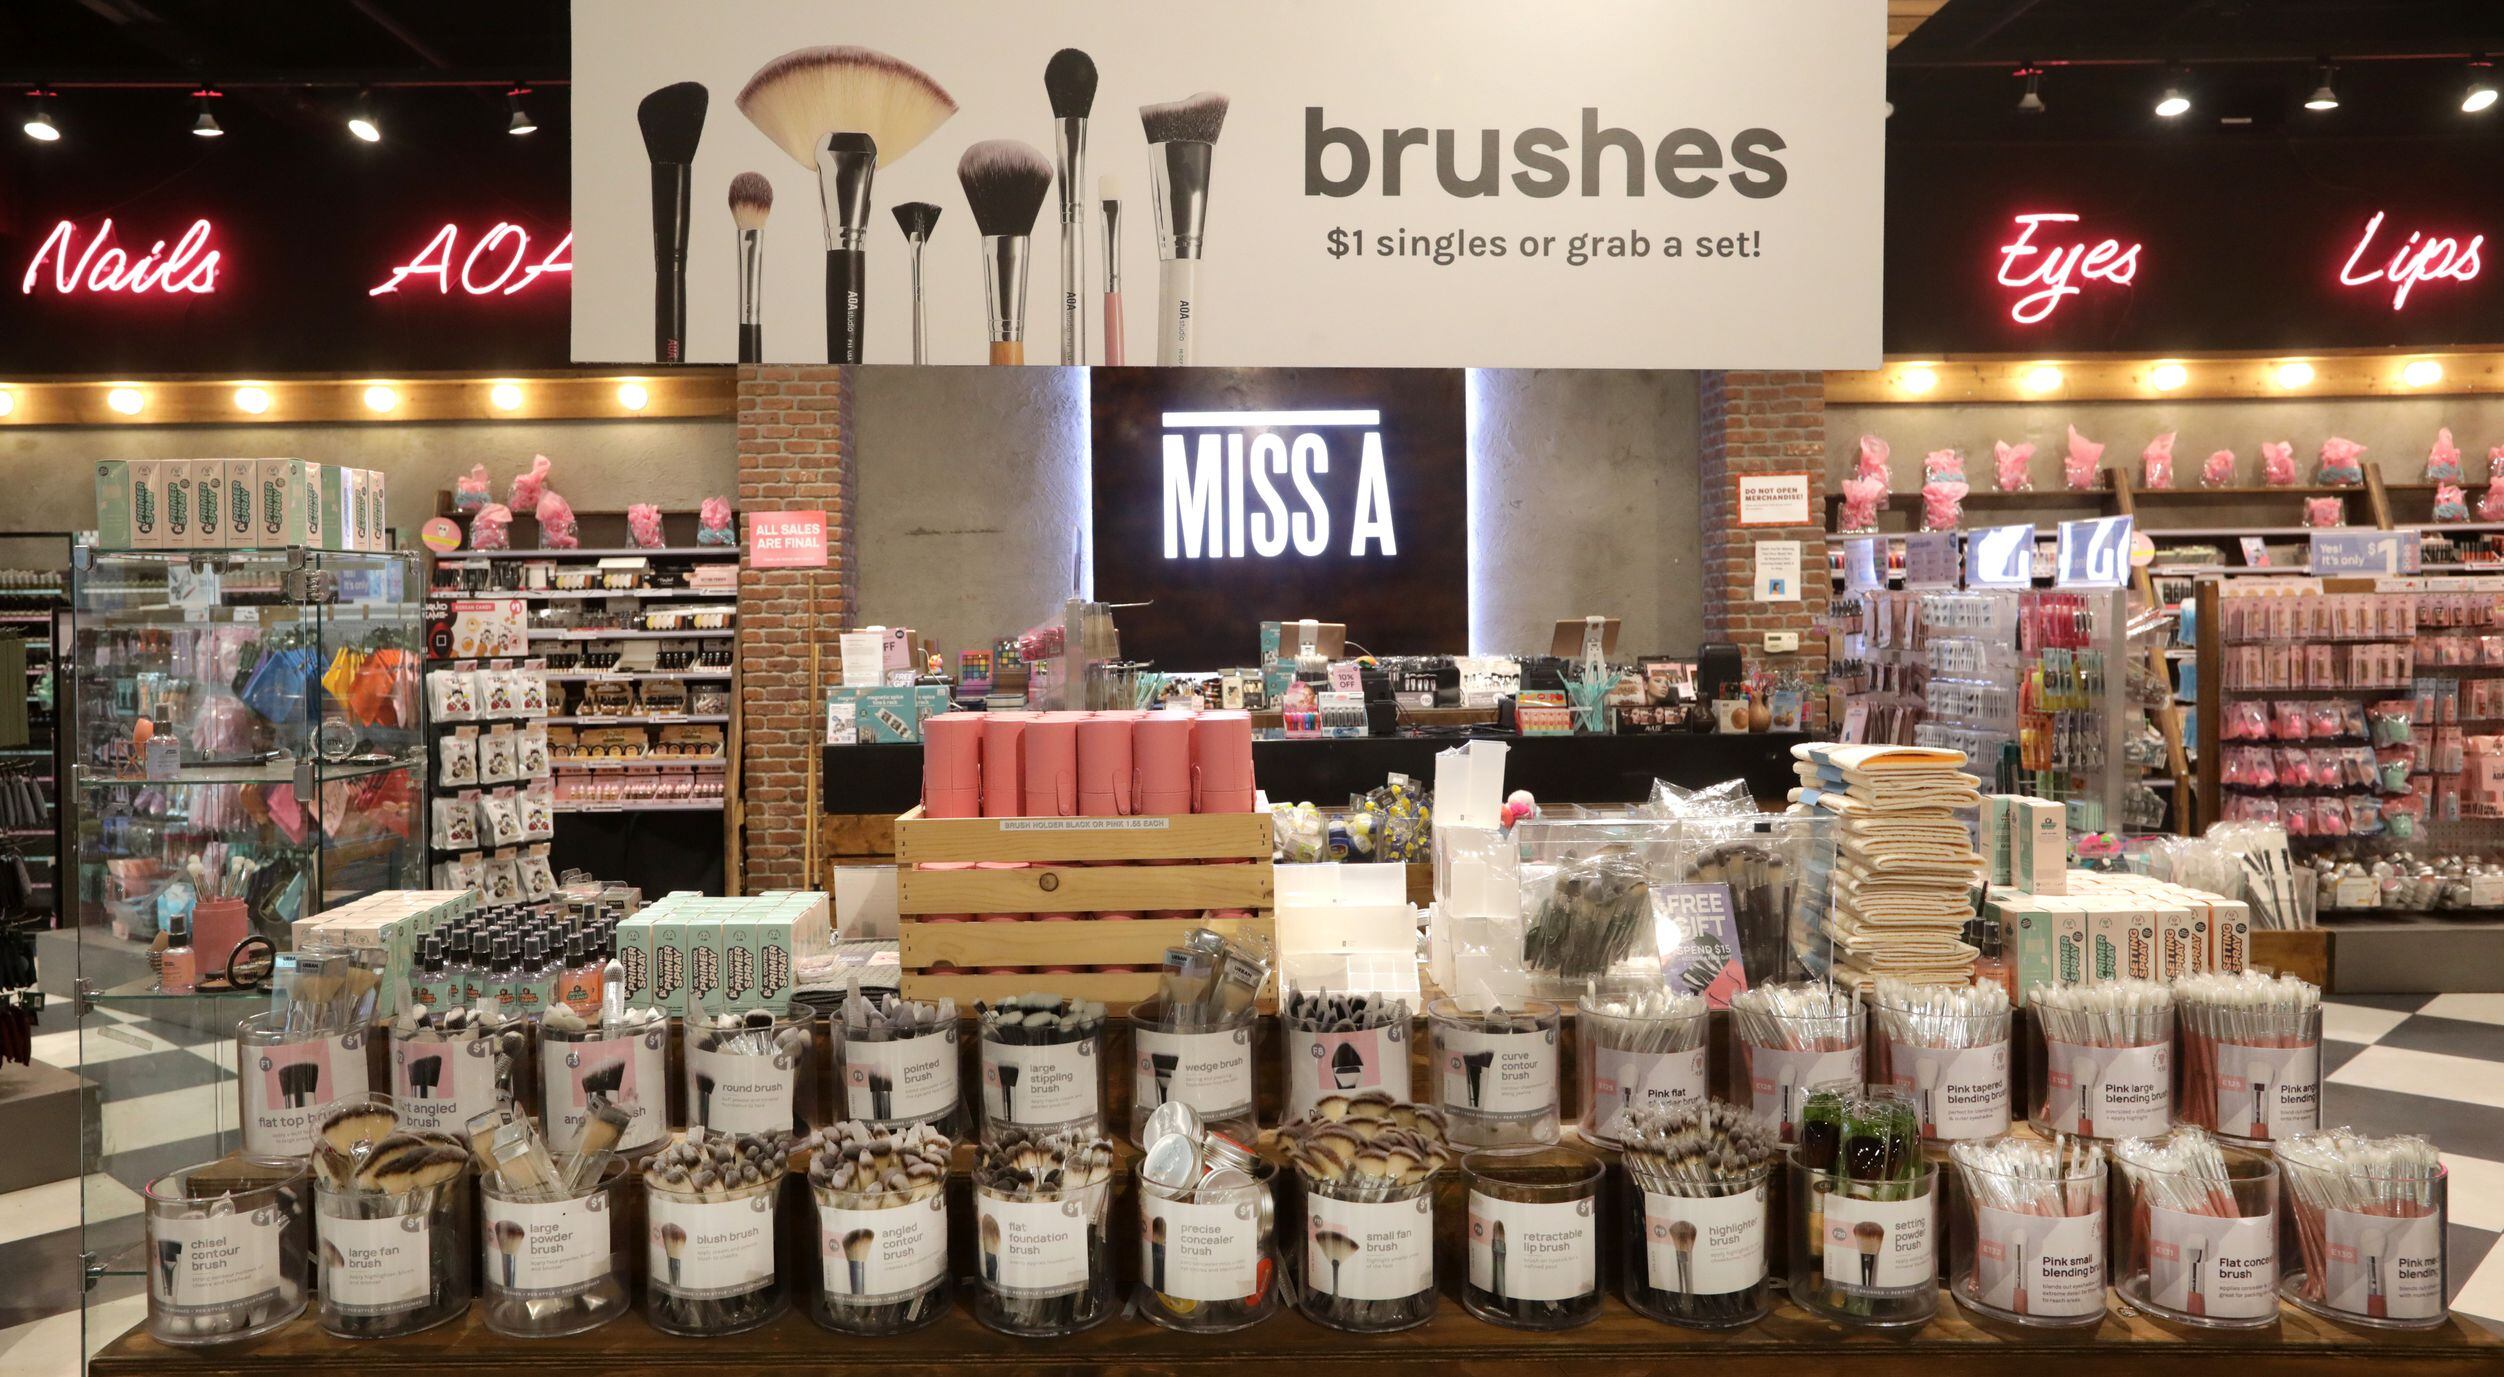 Teasing Dronning renere Dallas-based beauty retailer Miss A is taking its $1 prices to more cities